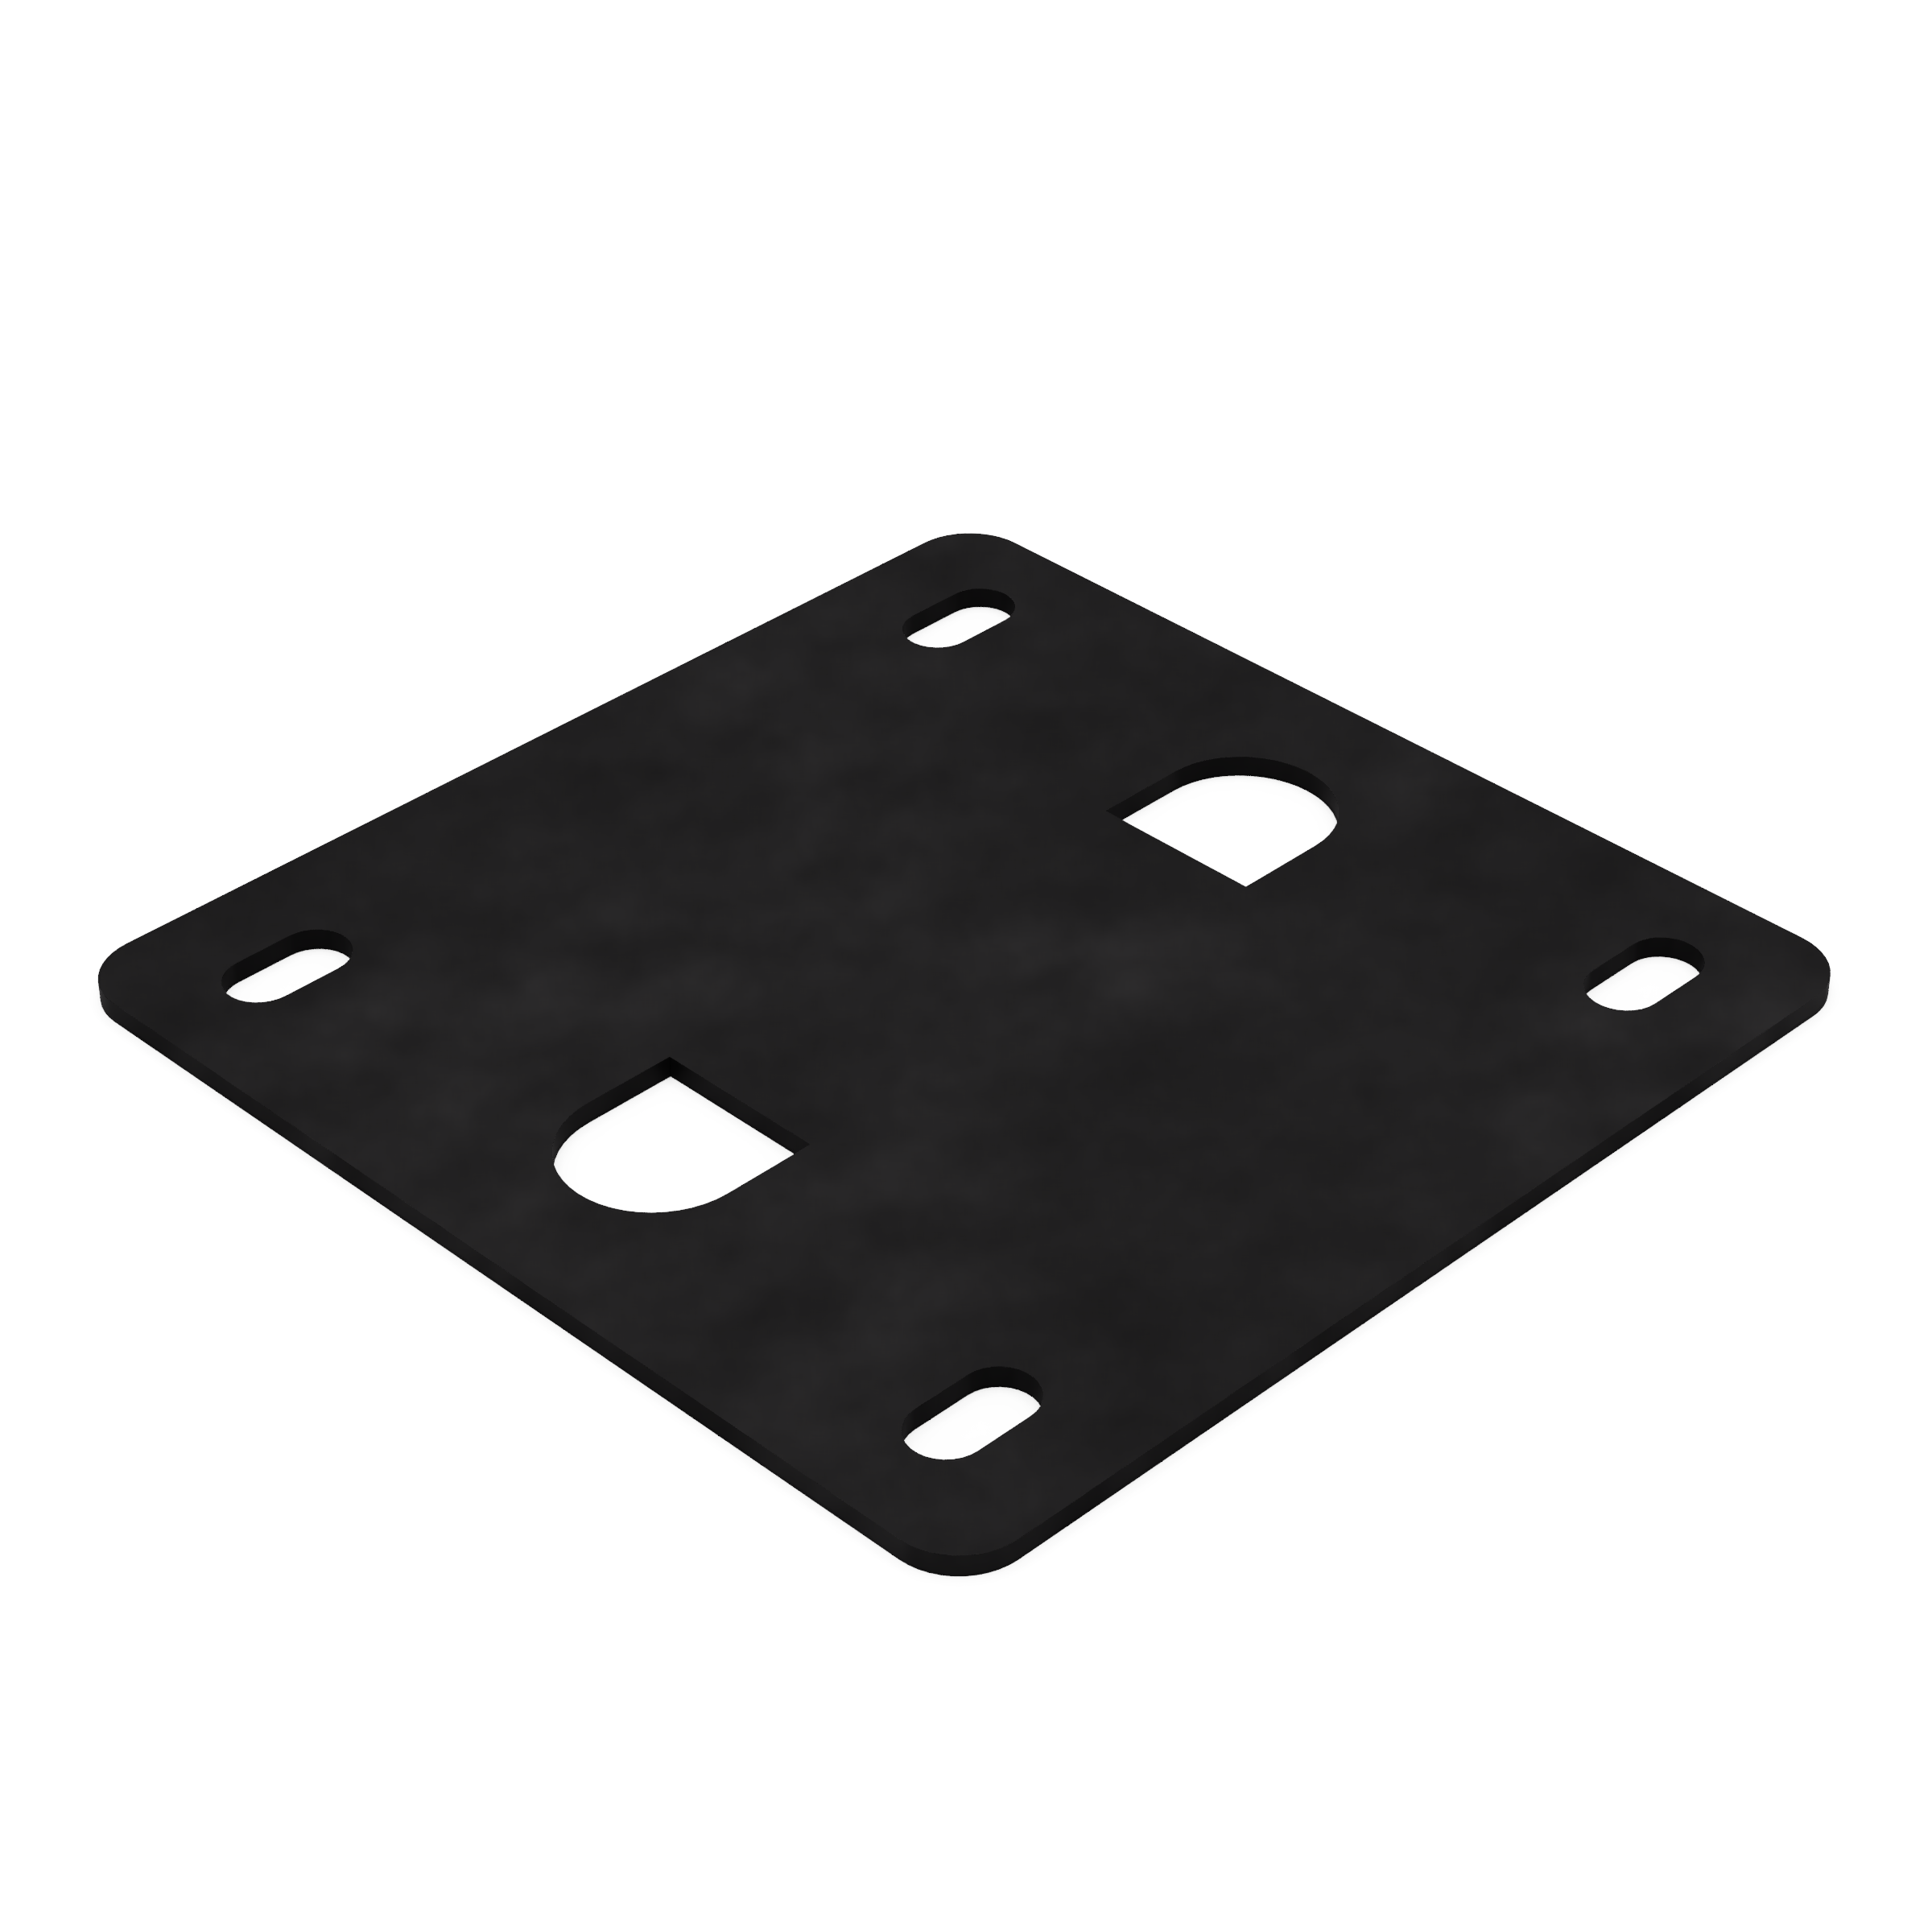 EI125 x 1 1/2" Vertical End Bell Mounting Pad/Insulator